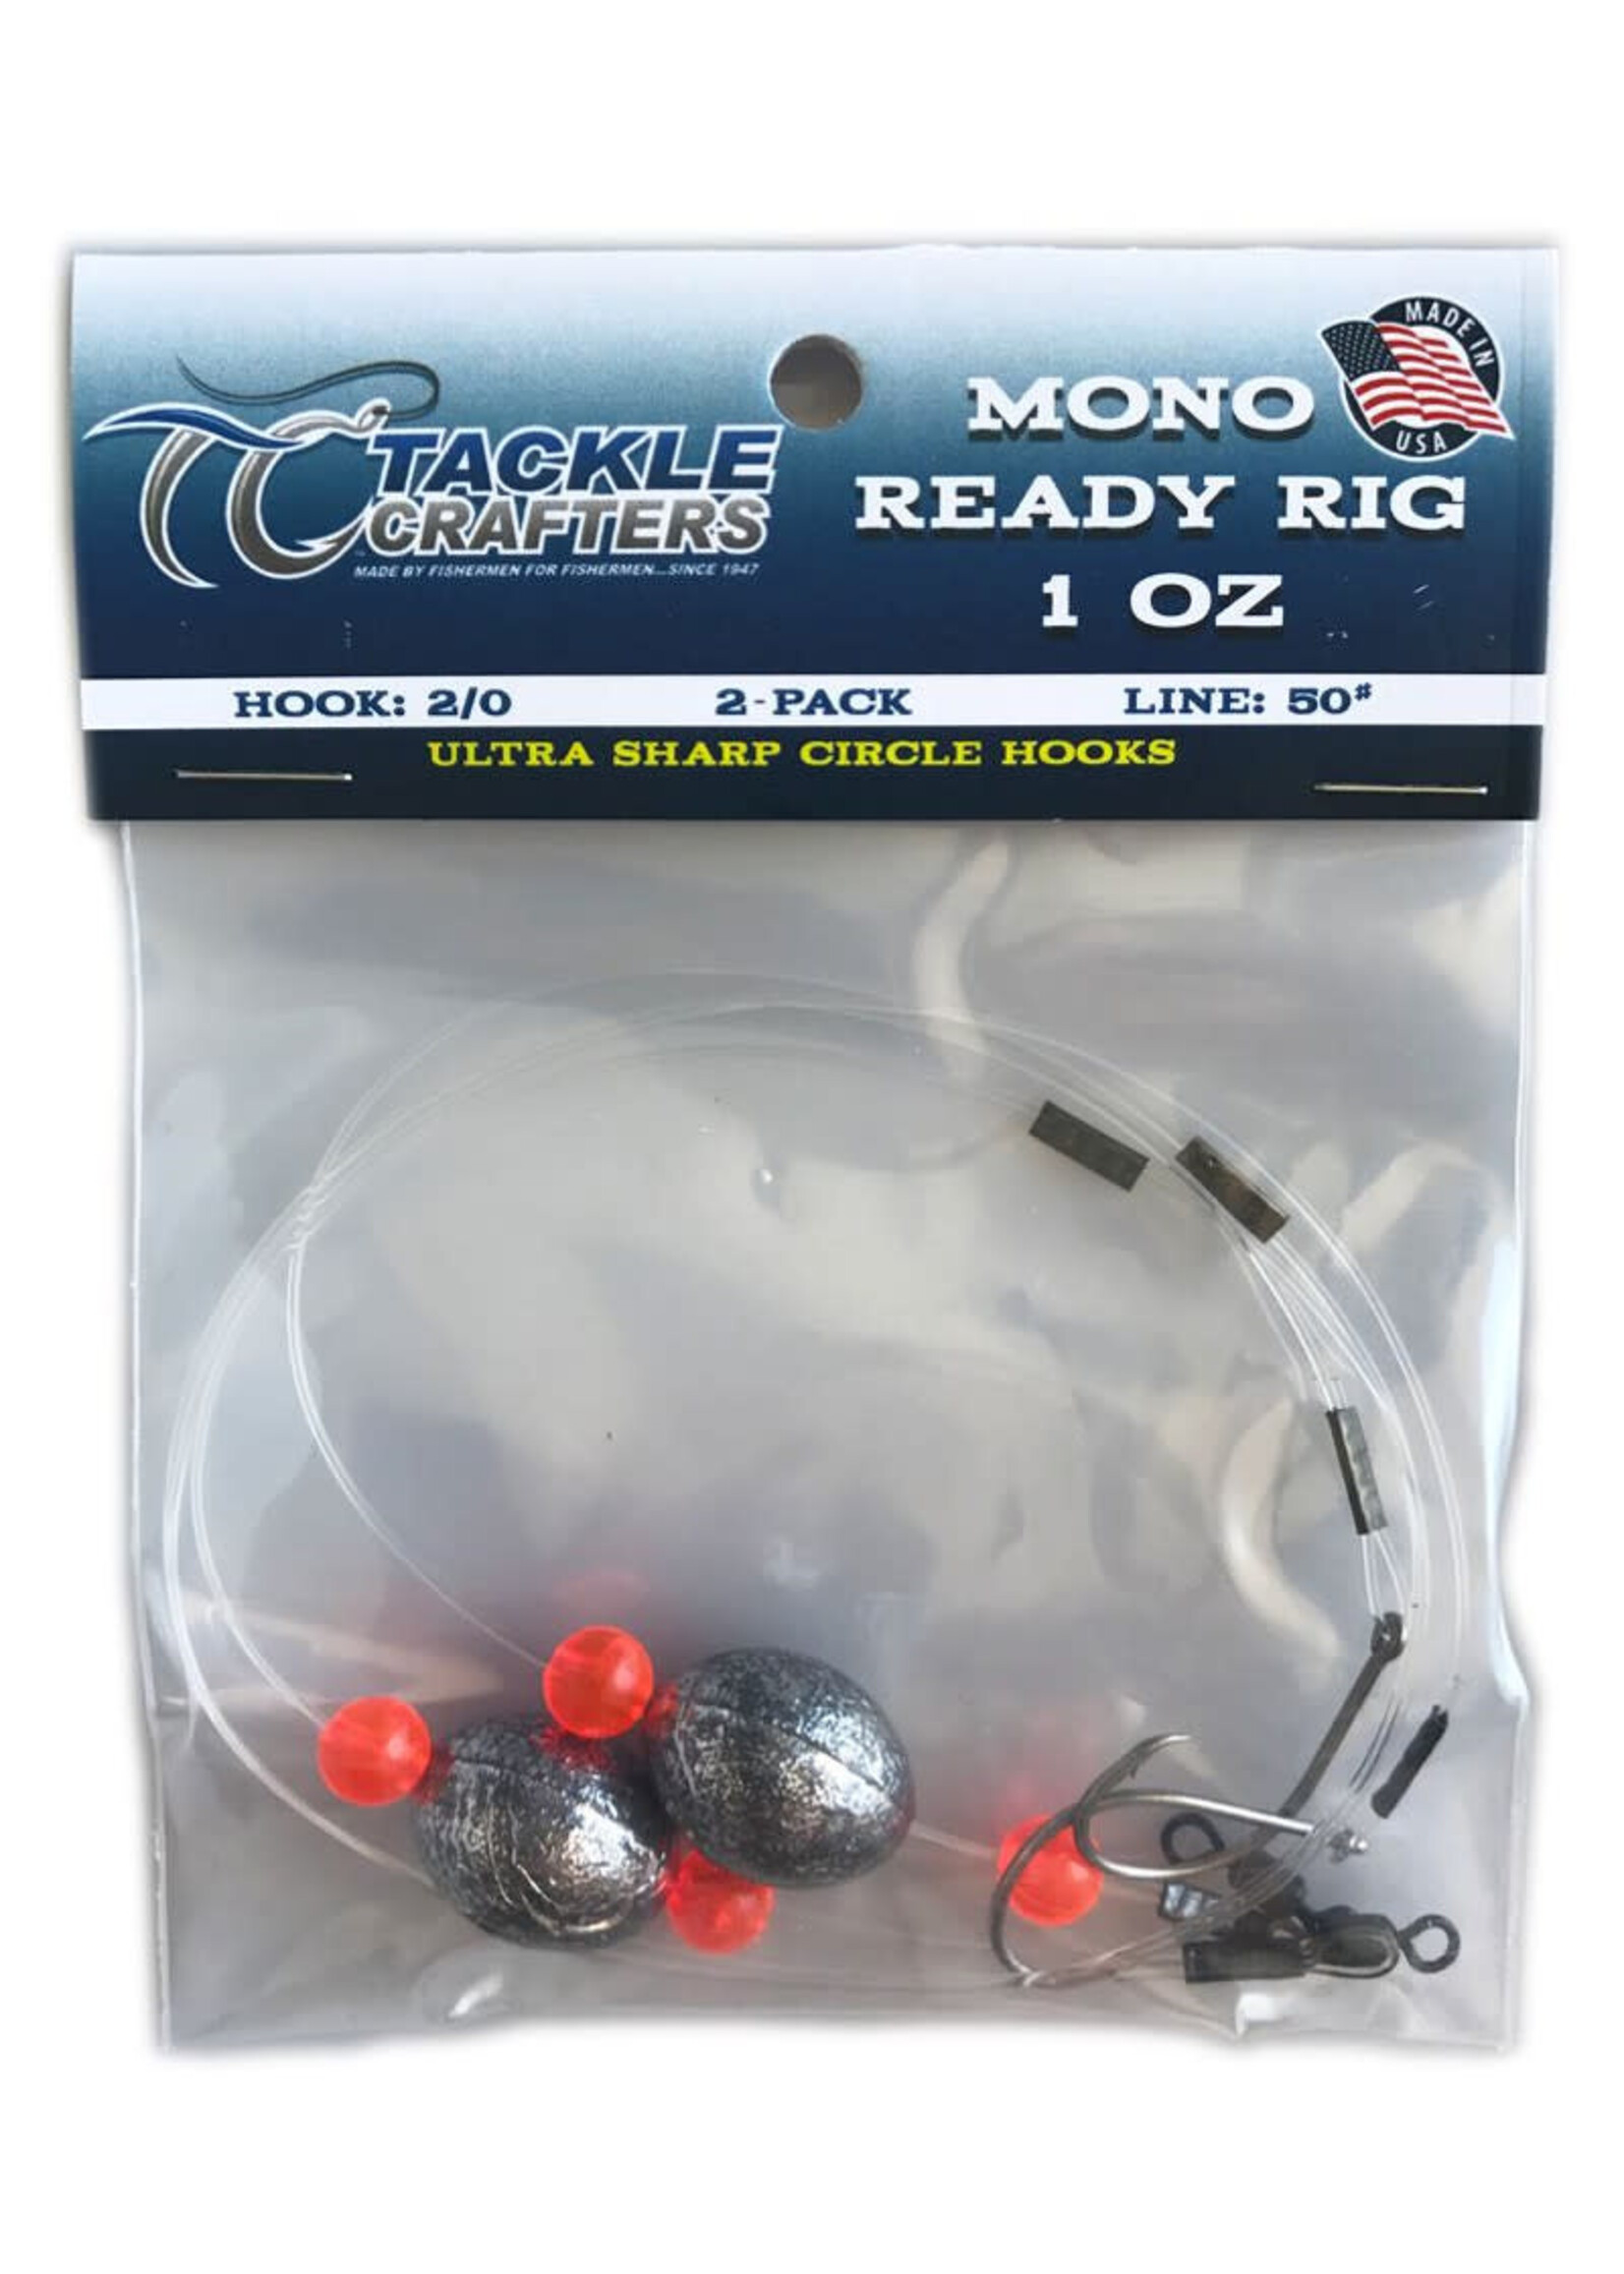 Tackle Crafters Tackle Crafters Mono 50# Ready Rig 1oz 2/0 hook